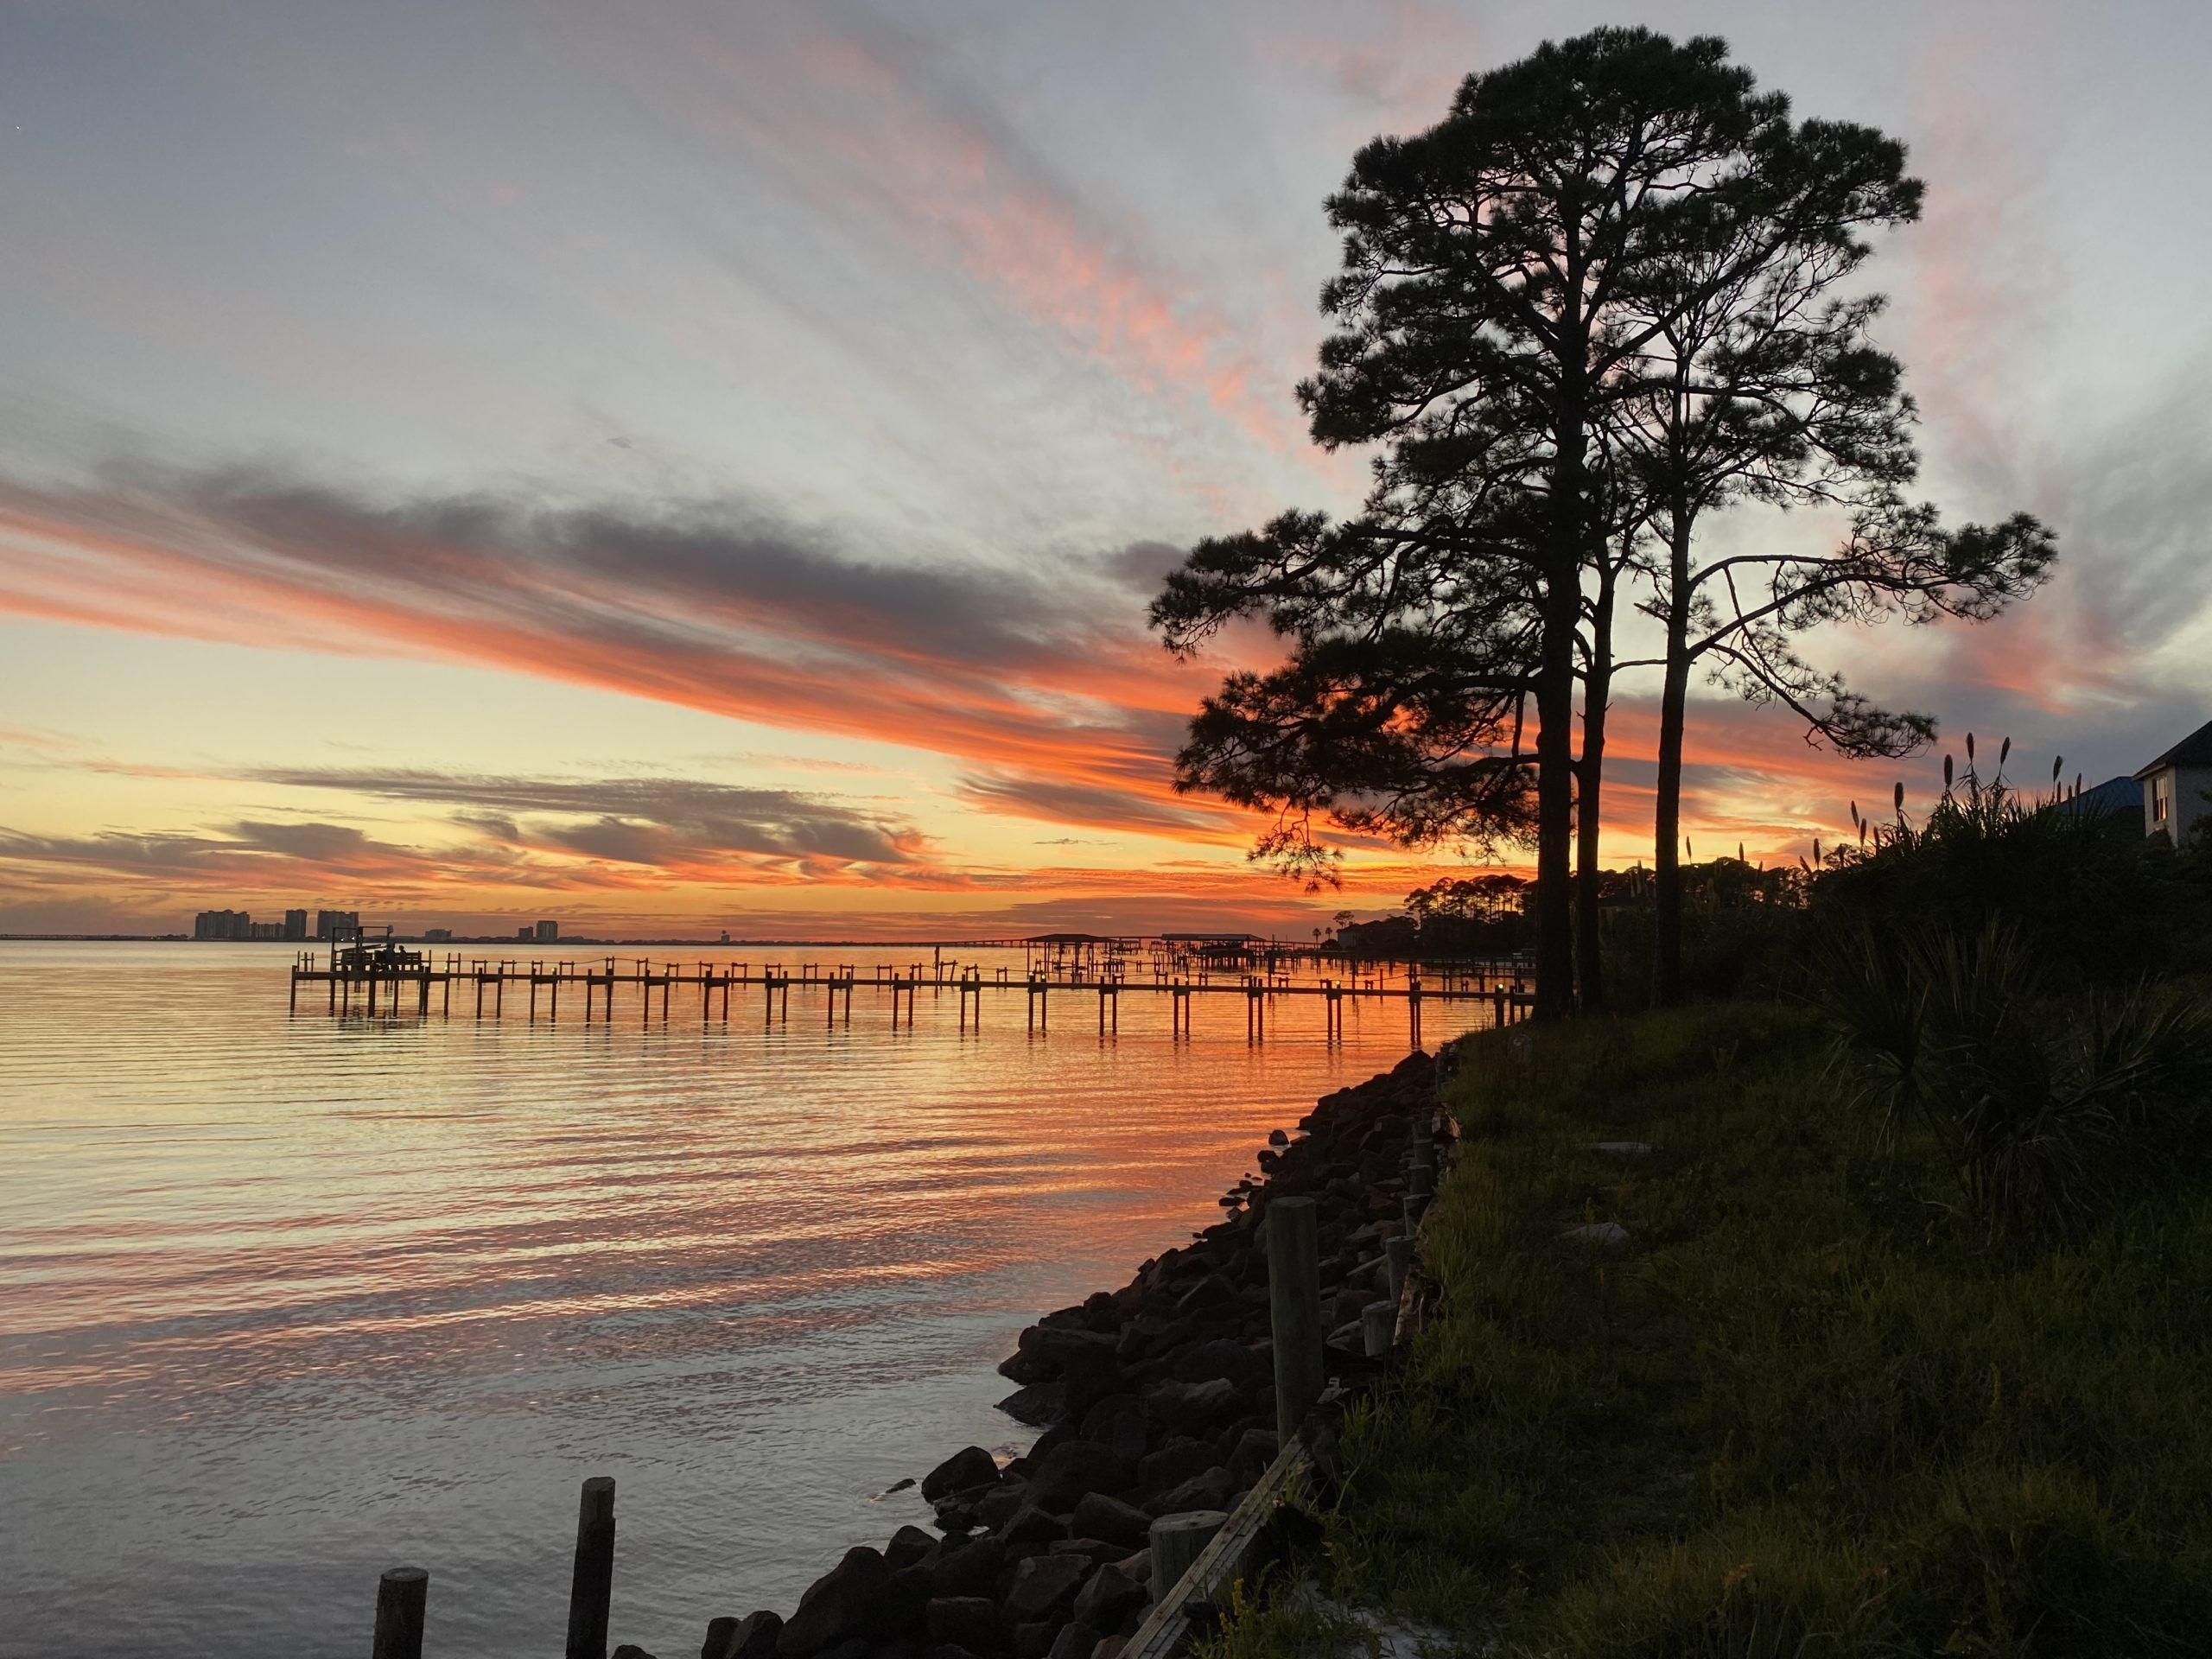 Today's Photo of the Day comes from Lanie Beck. Lanie took this photo of a sunset from her home, which overlooks the Santa Rosa Sound.